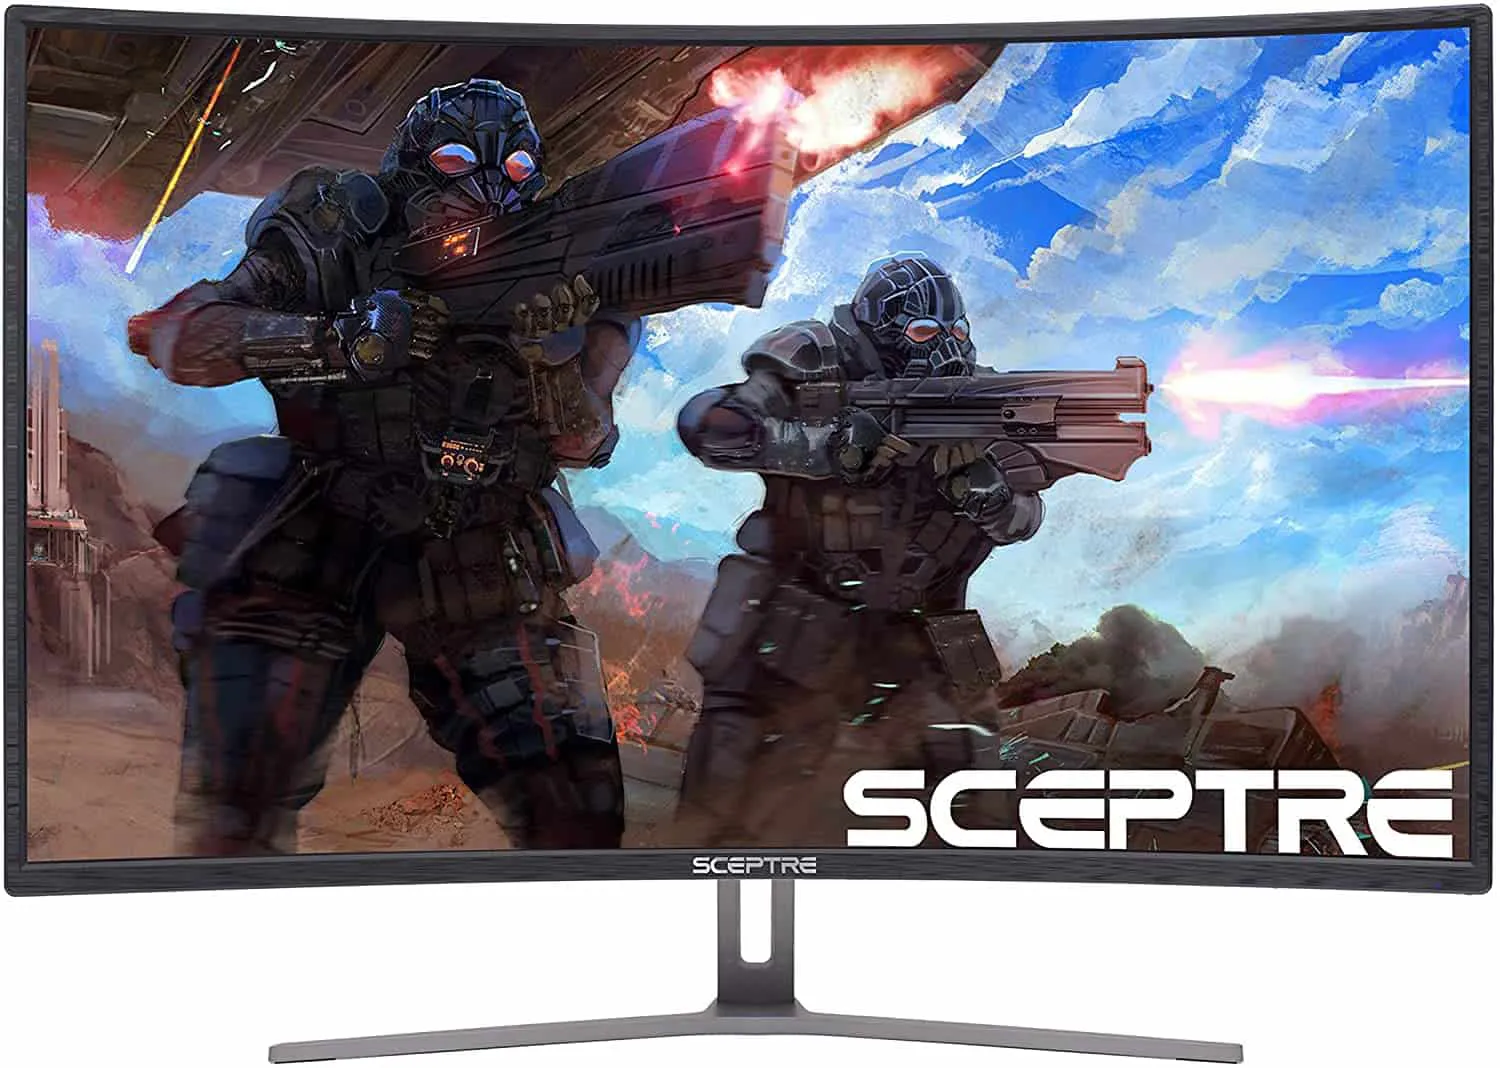 Sceptre 24-Inch Curved 144Hz Gaming Monitor